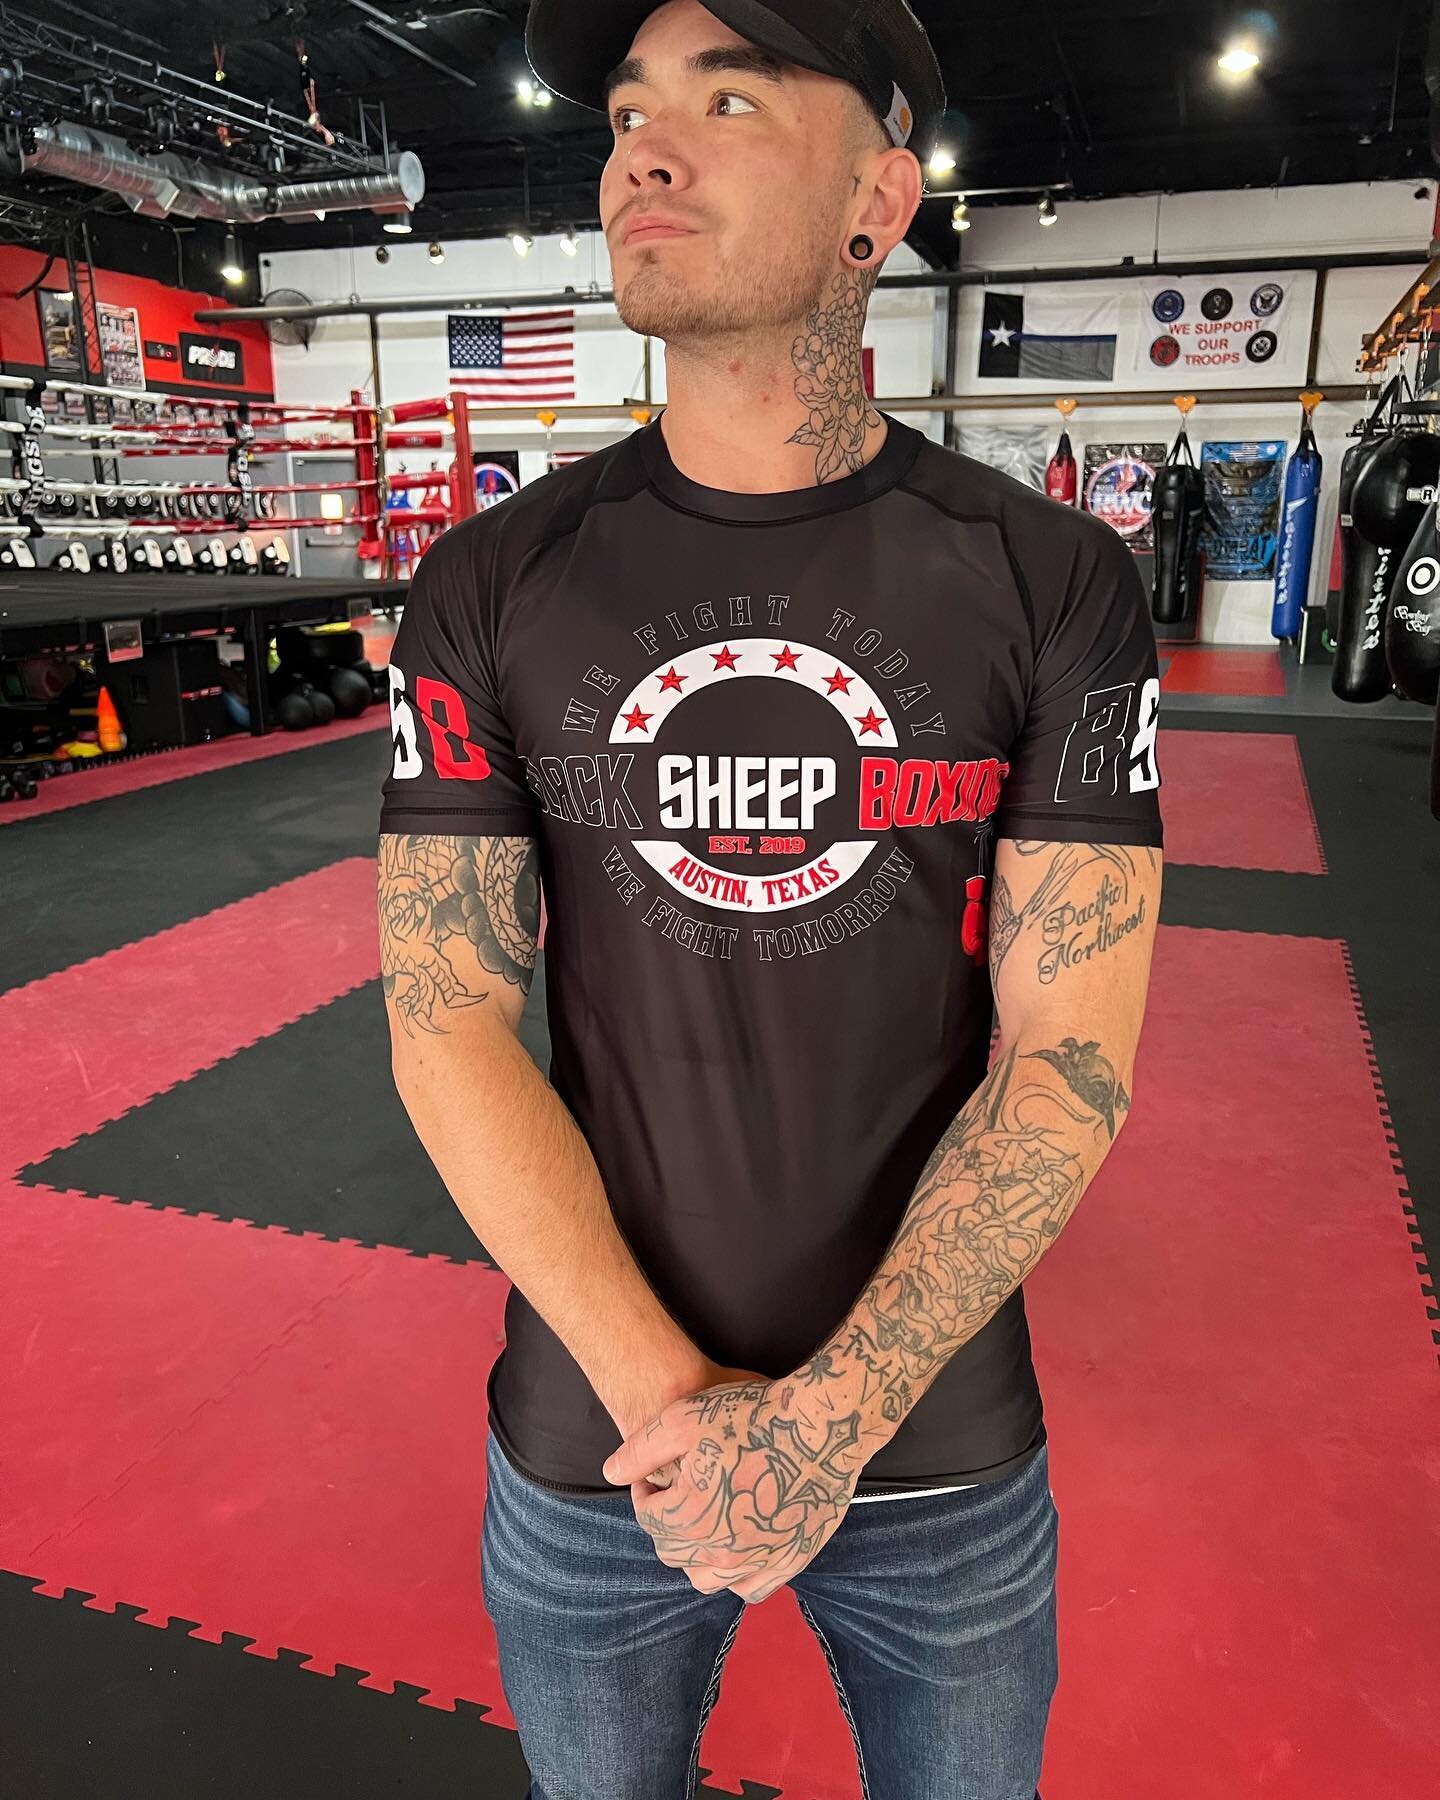 New rashguards are in! 

Only a limited supply so stop in the pro shop and grab yours today.💥 

Thanks to our friends over at @10paustin for producing one bad ass product. 👊

#boxing #rashguards #family #fitness #competition #love #gring #work #red